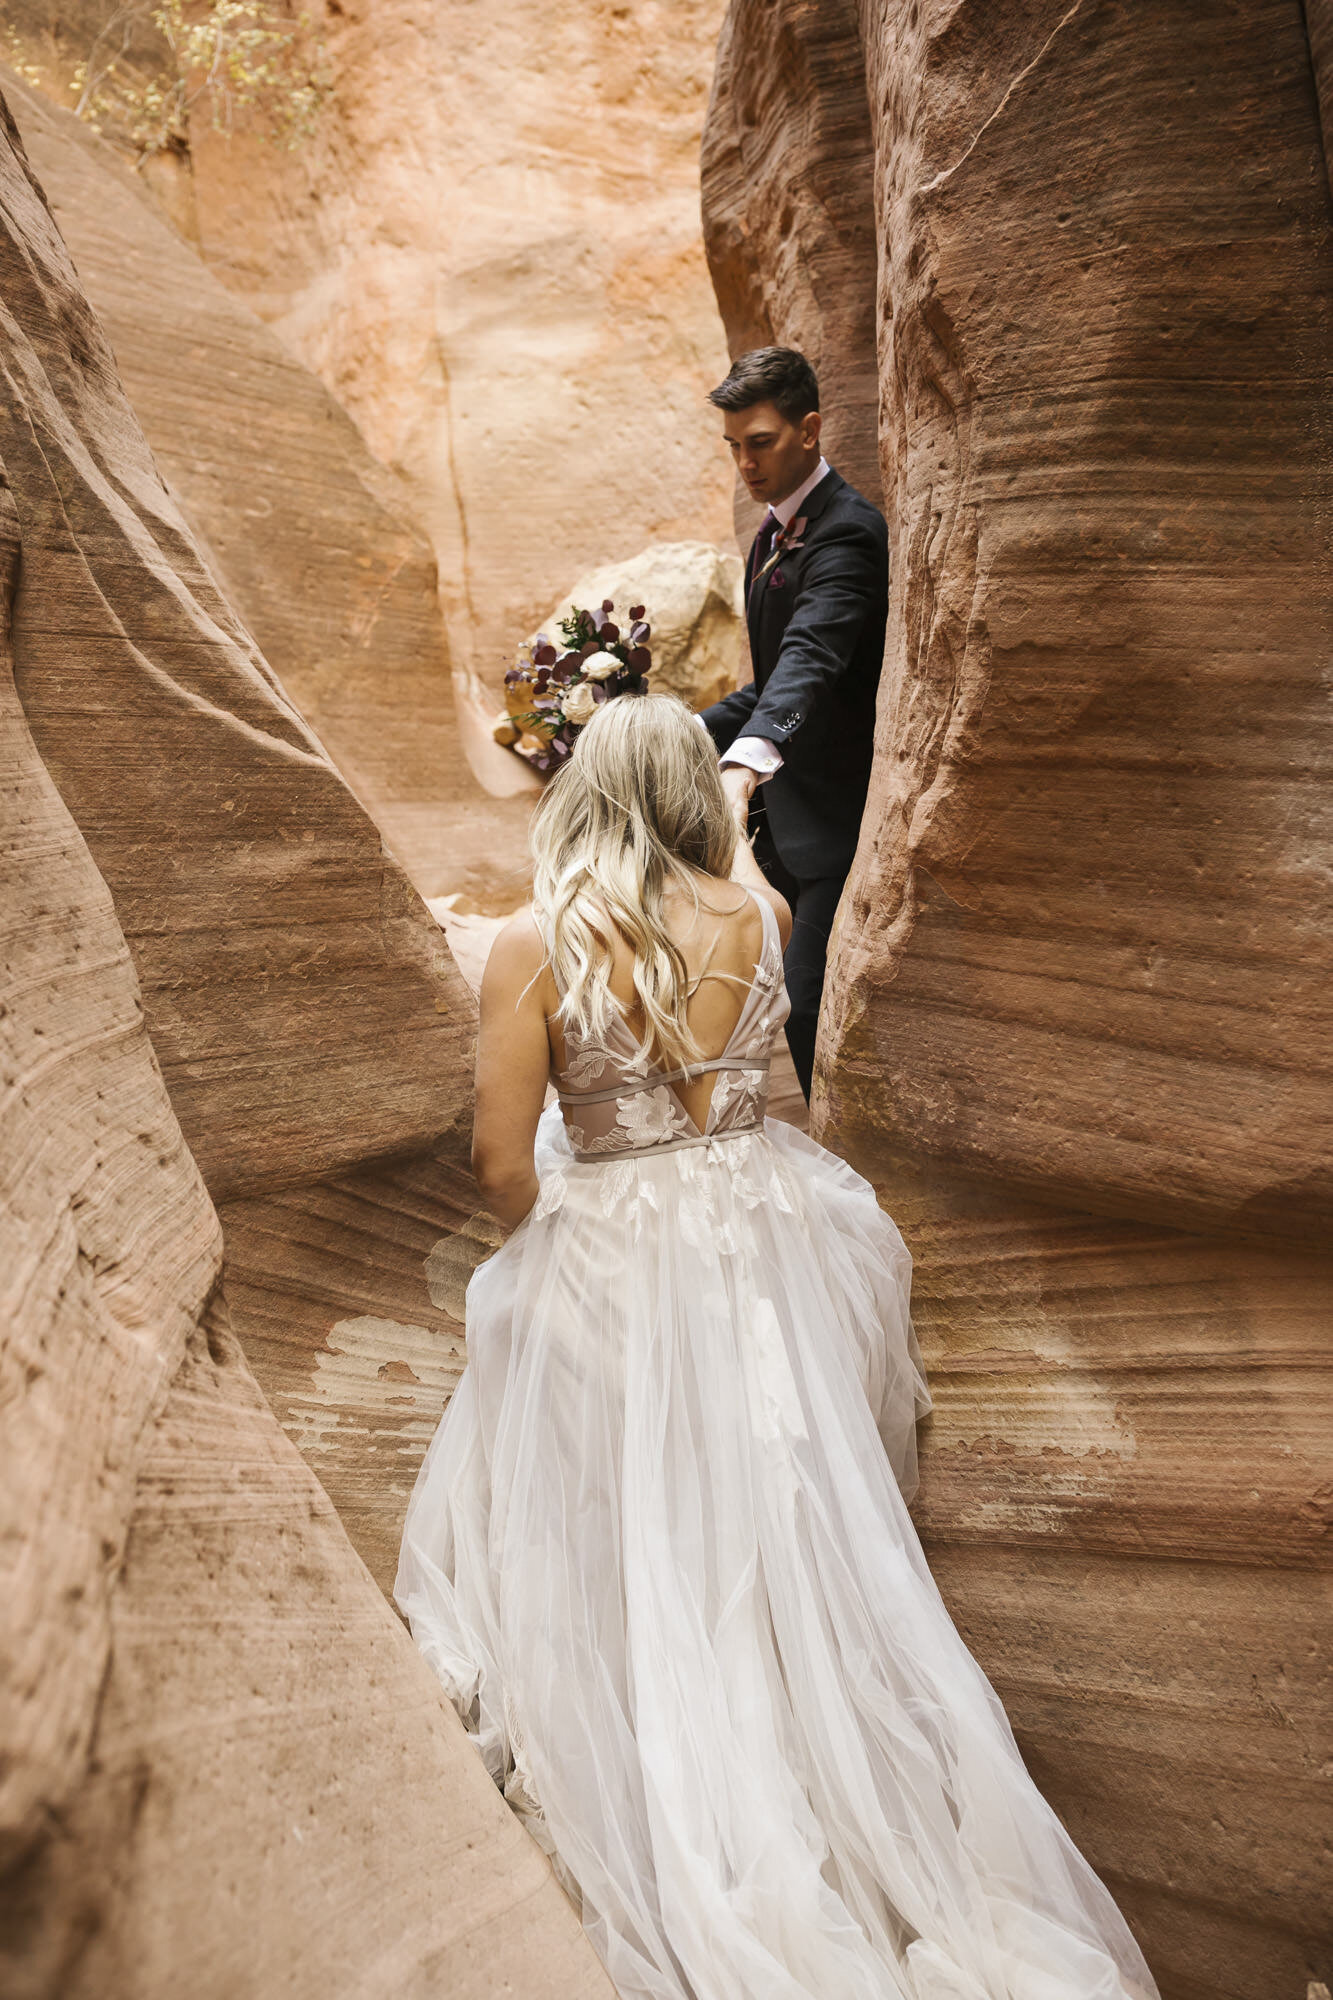 Groom helps his bride walk through slot canyon outside of Zion in Utah